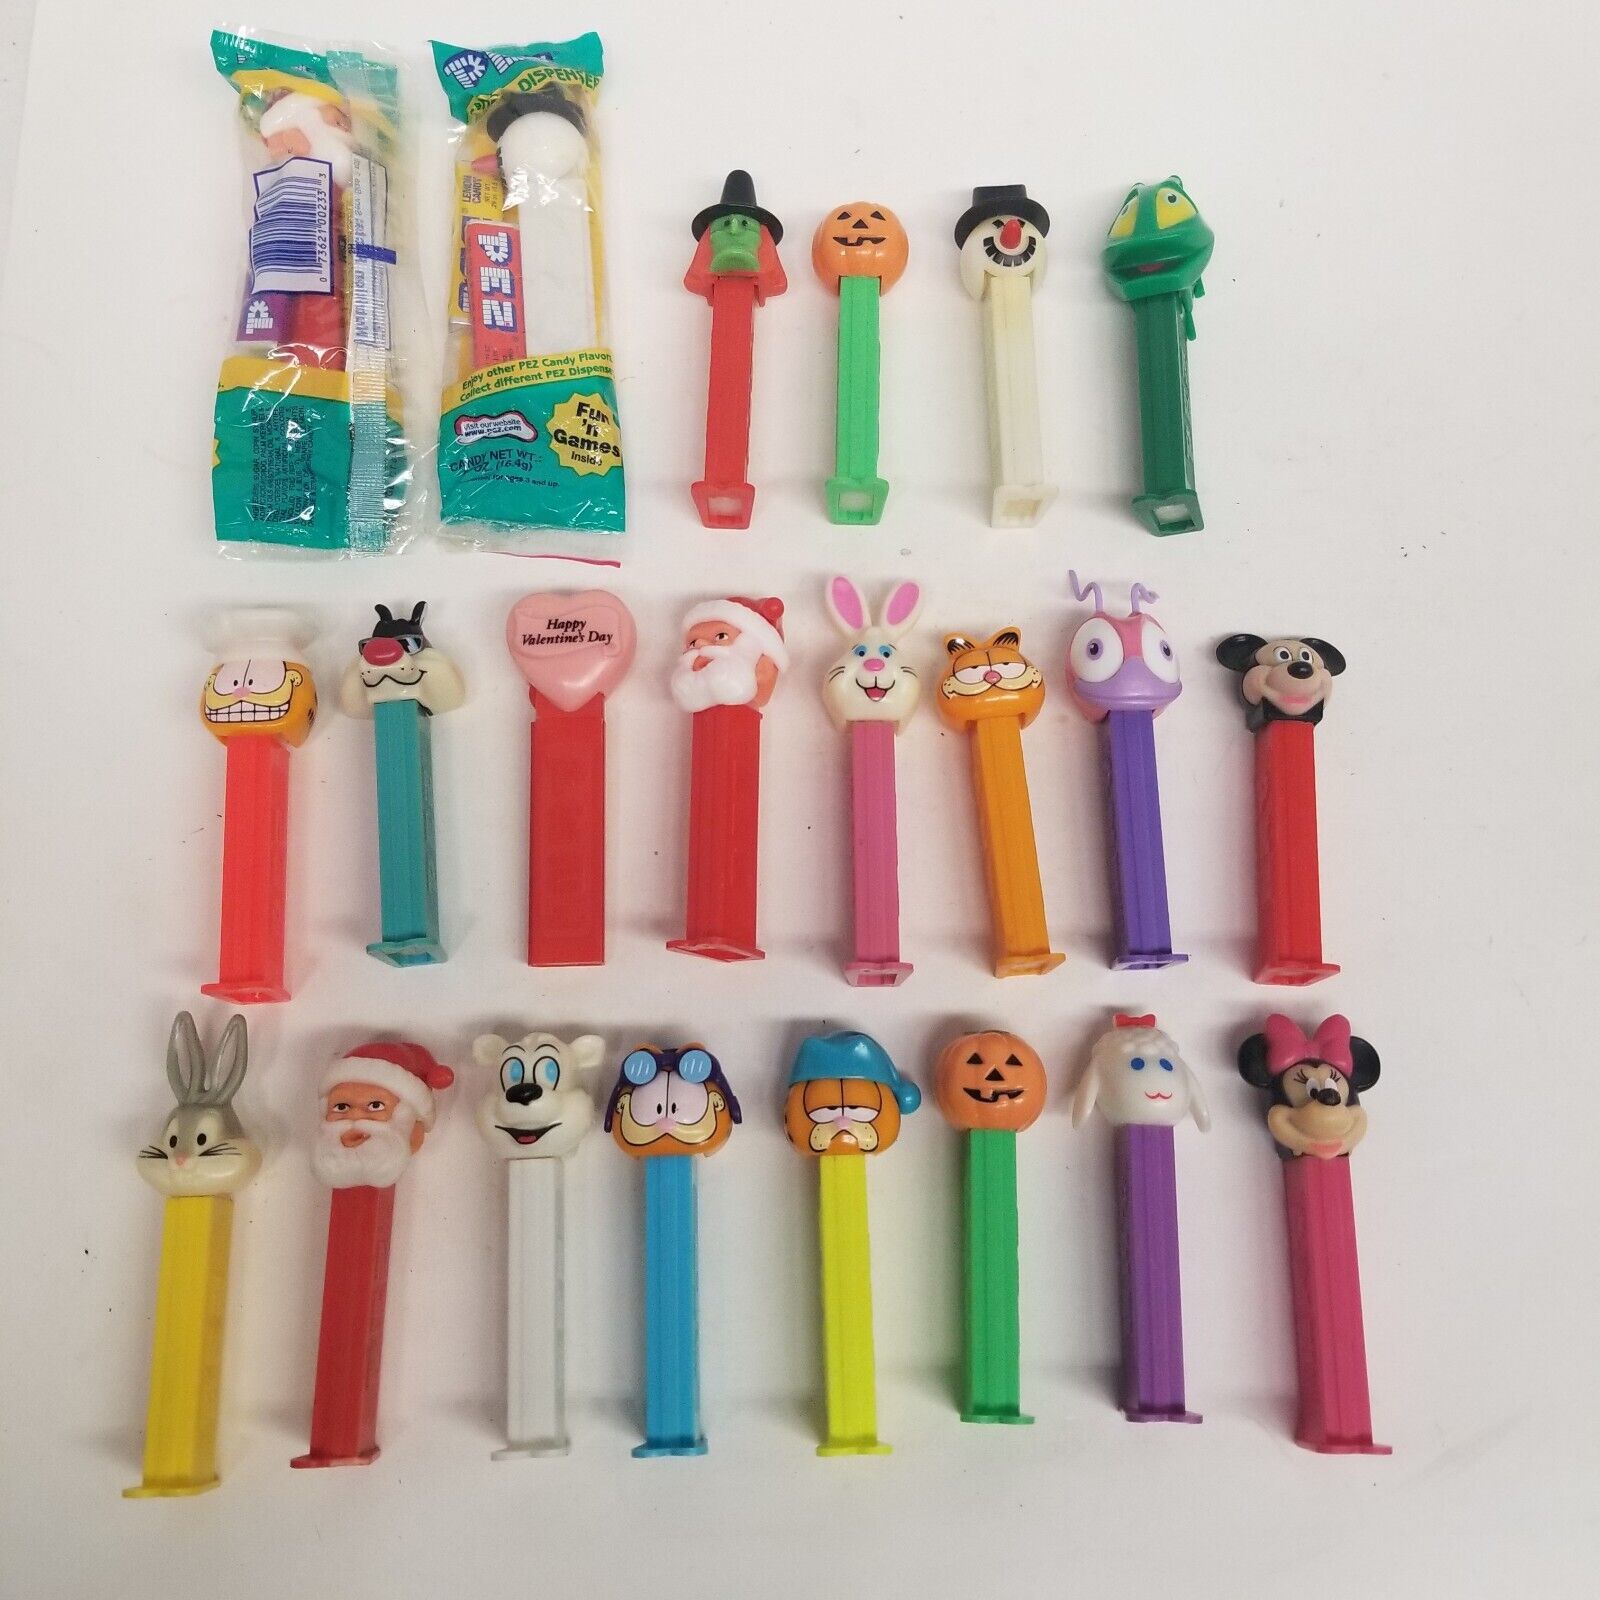 Vintage Pez Dispenser Lot of 22, 2 New, 20 Used, Holiday, Looney Tunes, LOOK